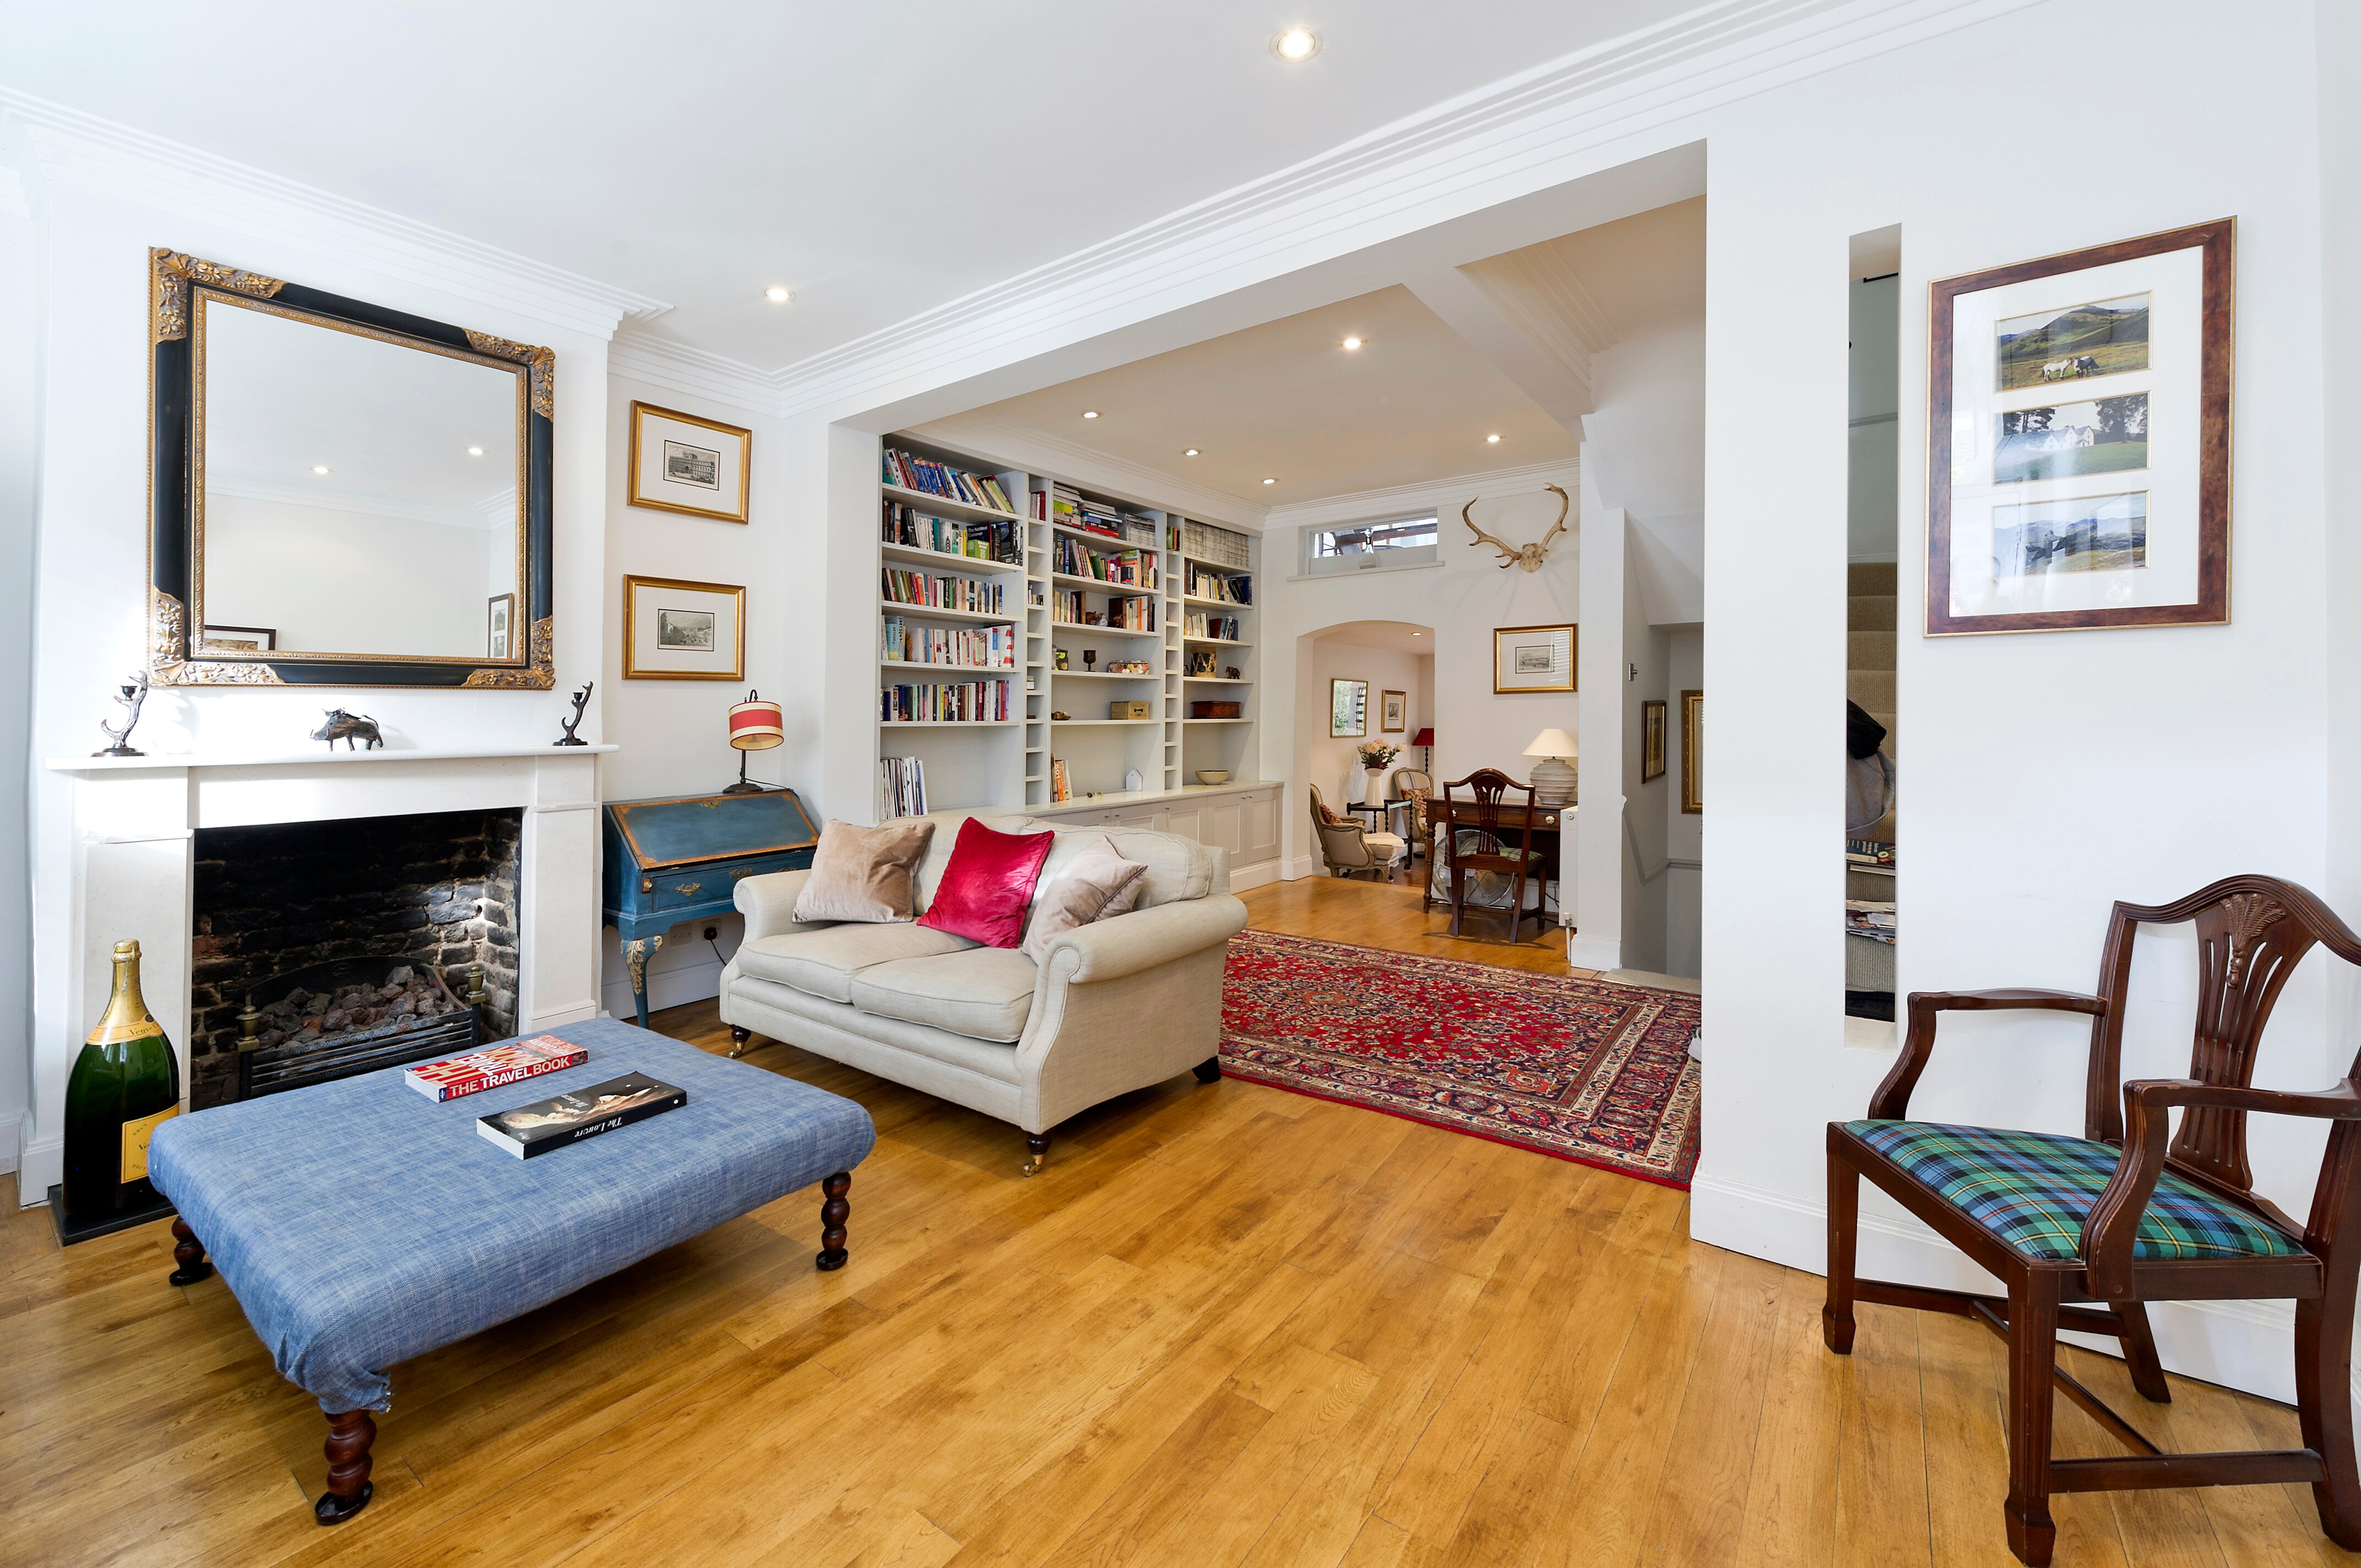 Property Image 1 - Rare, Spacious Home with Splendid Garden; in the Heart of Fulham